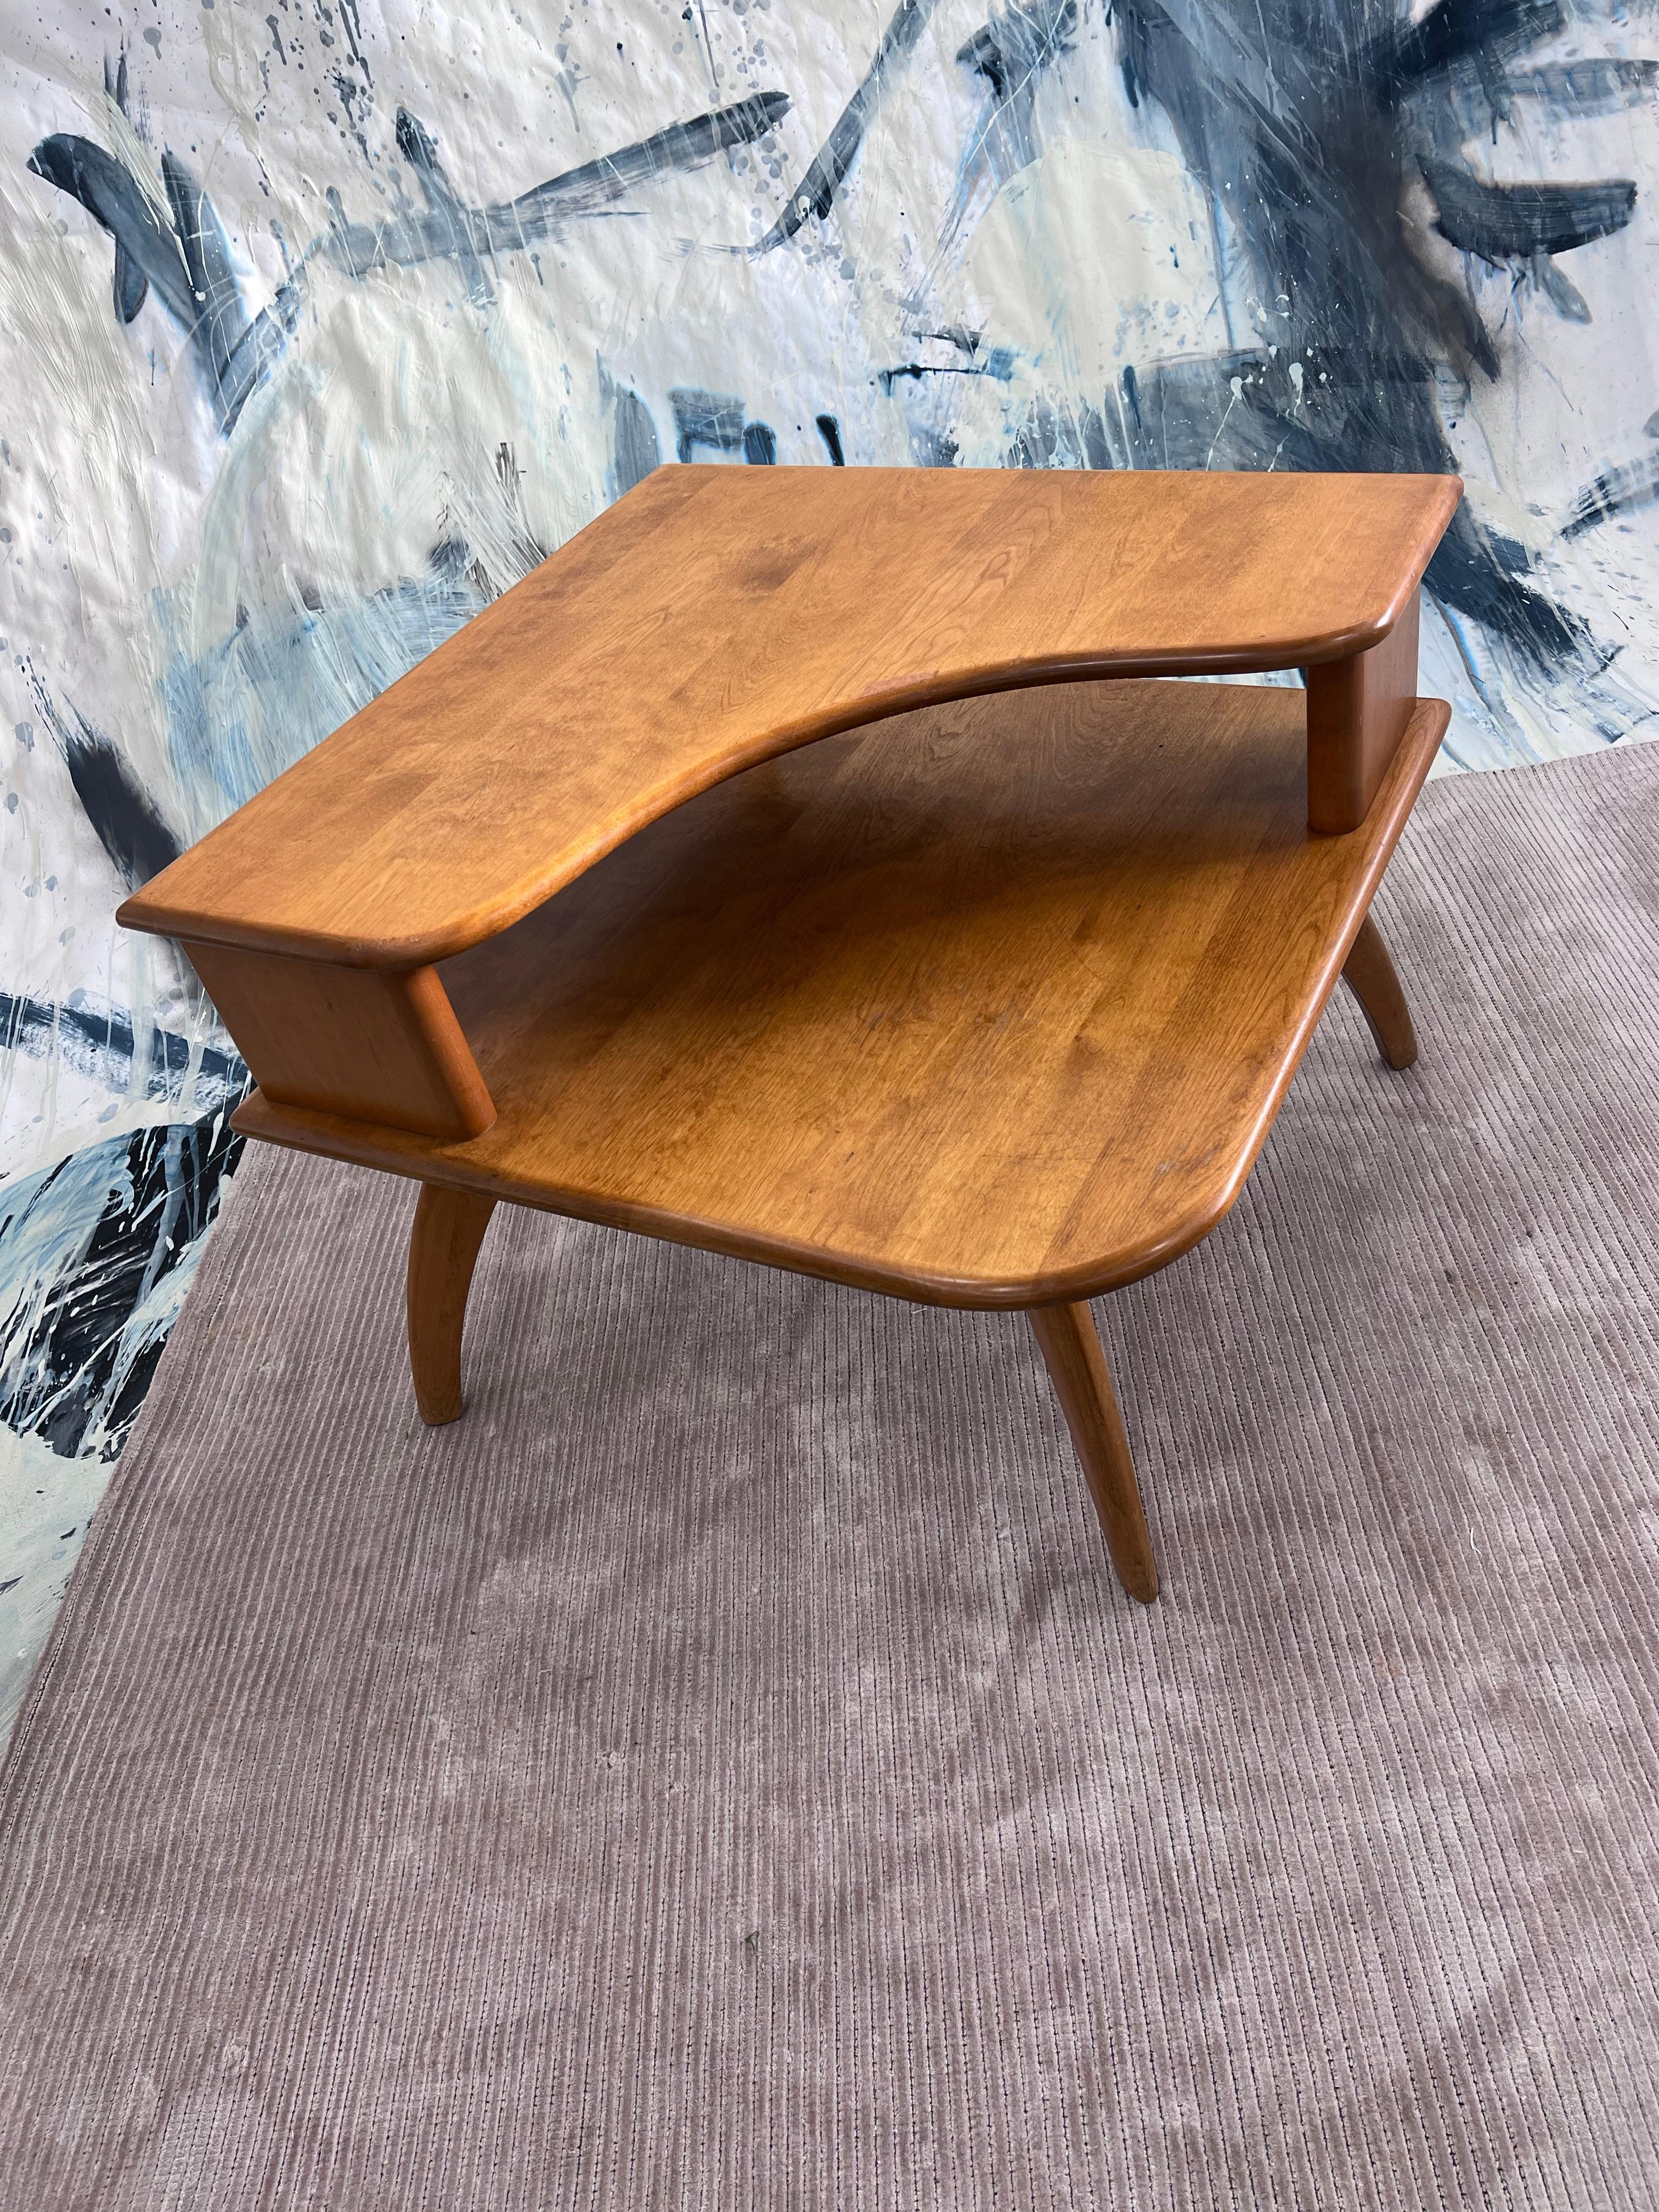 Vintage Heywood Wakefield wishbone two-step corner table constructed of solid birch with convex legs. 